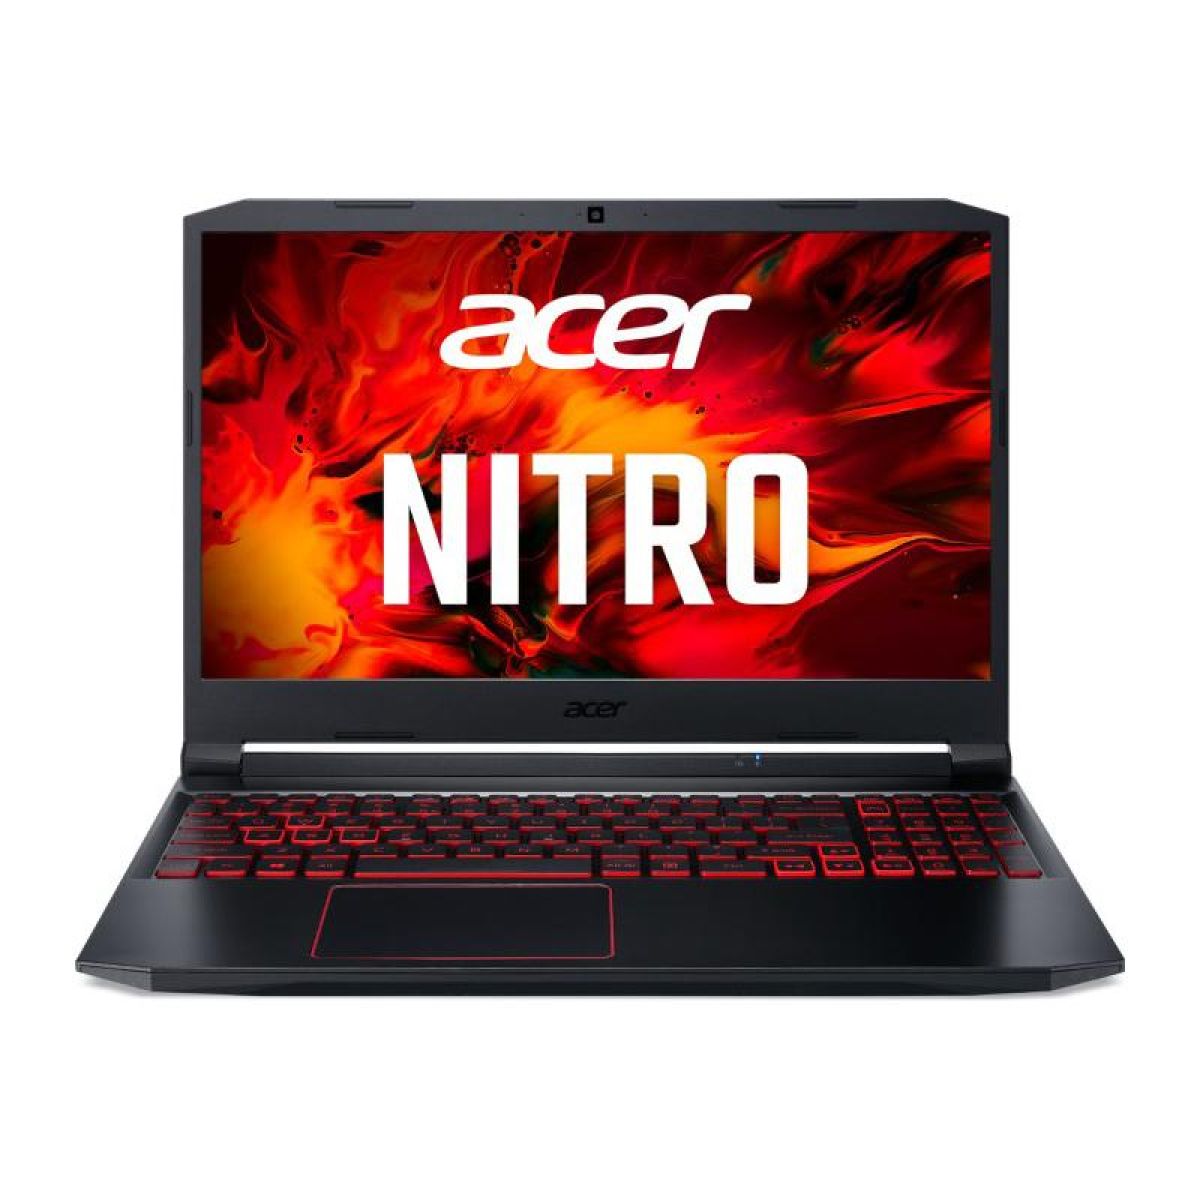 Acer N17C1 Intel Core i5 7300HQ 2.5GHz 4 Go HDD 1 To